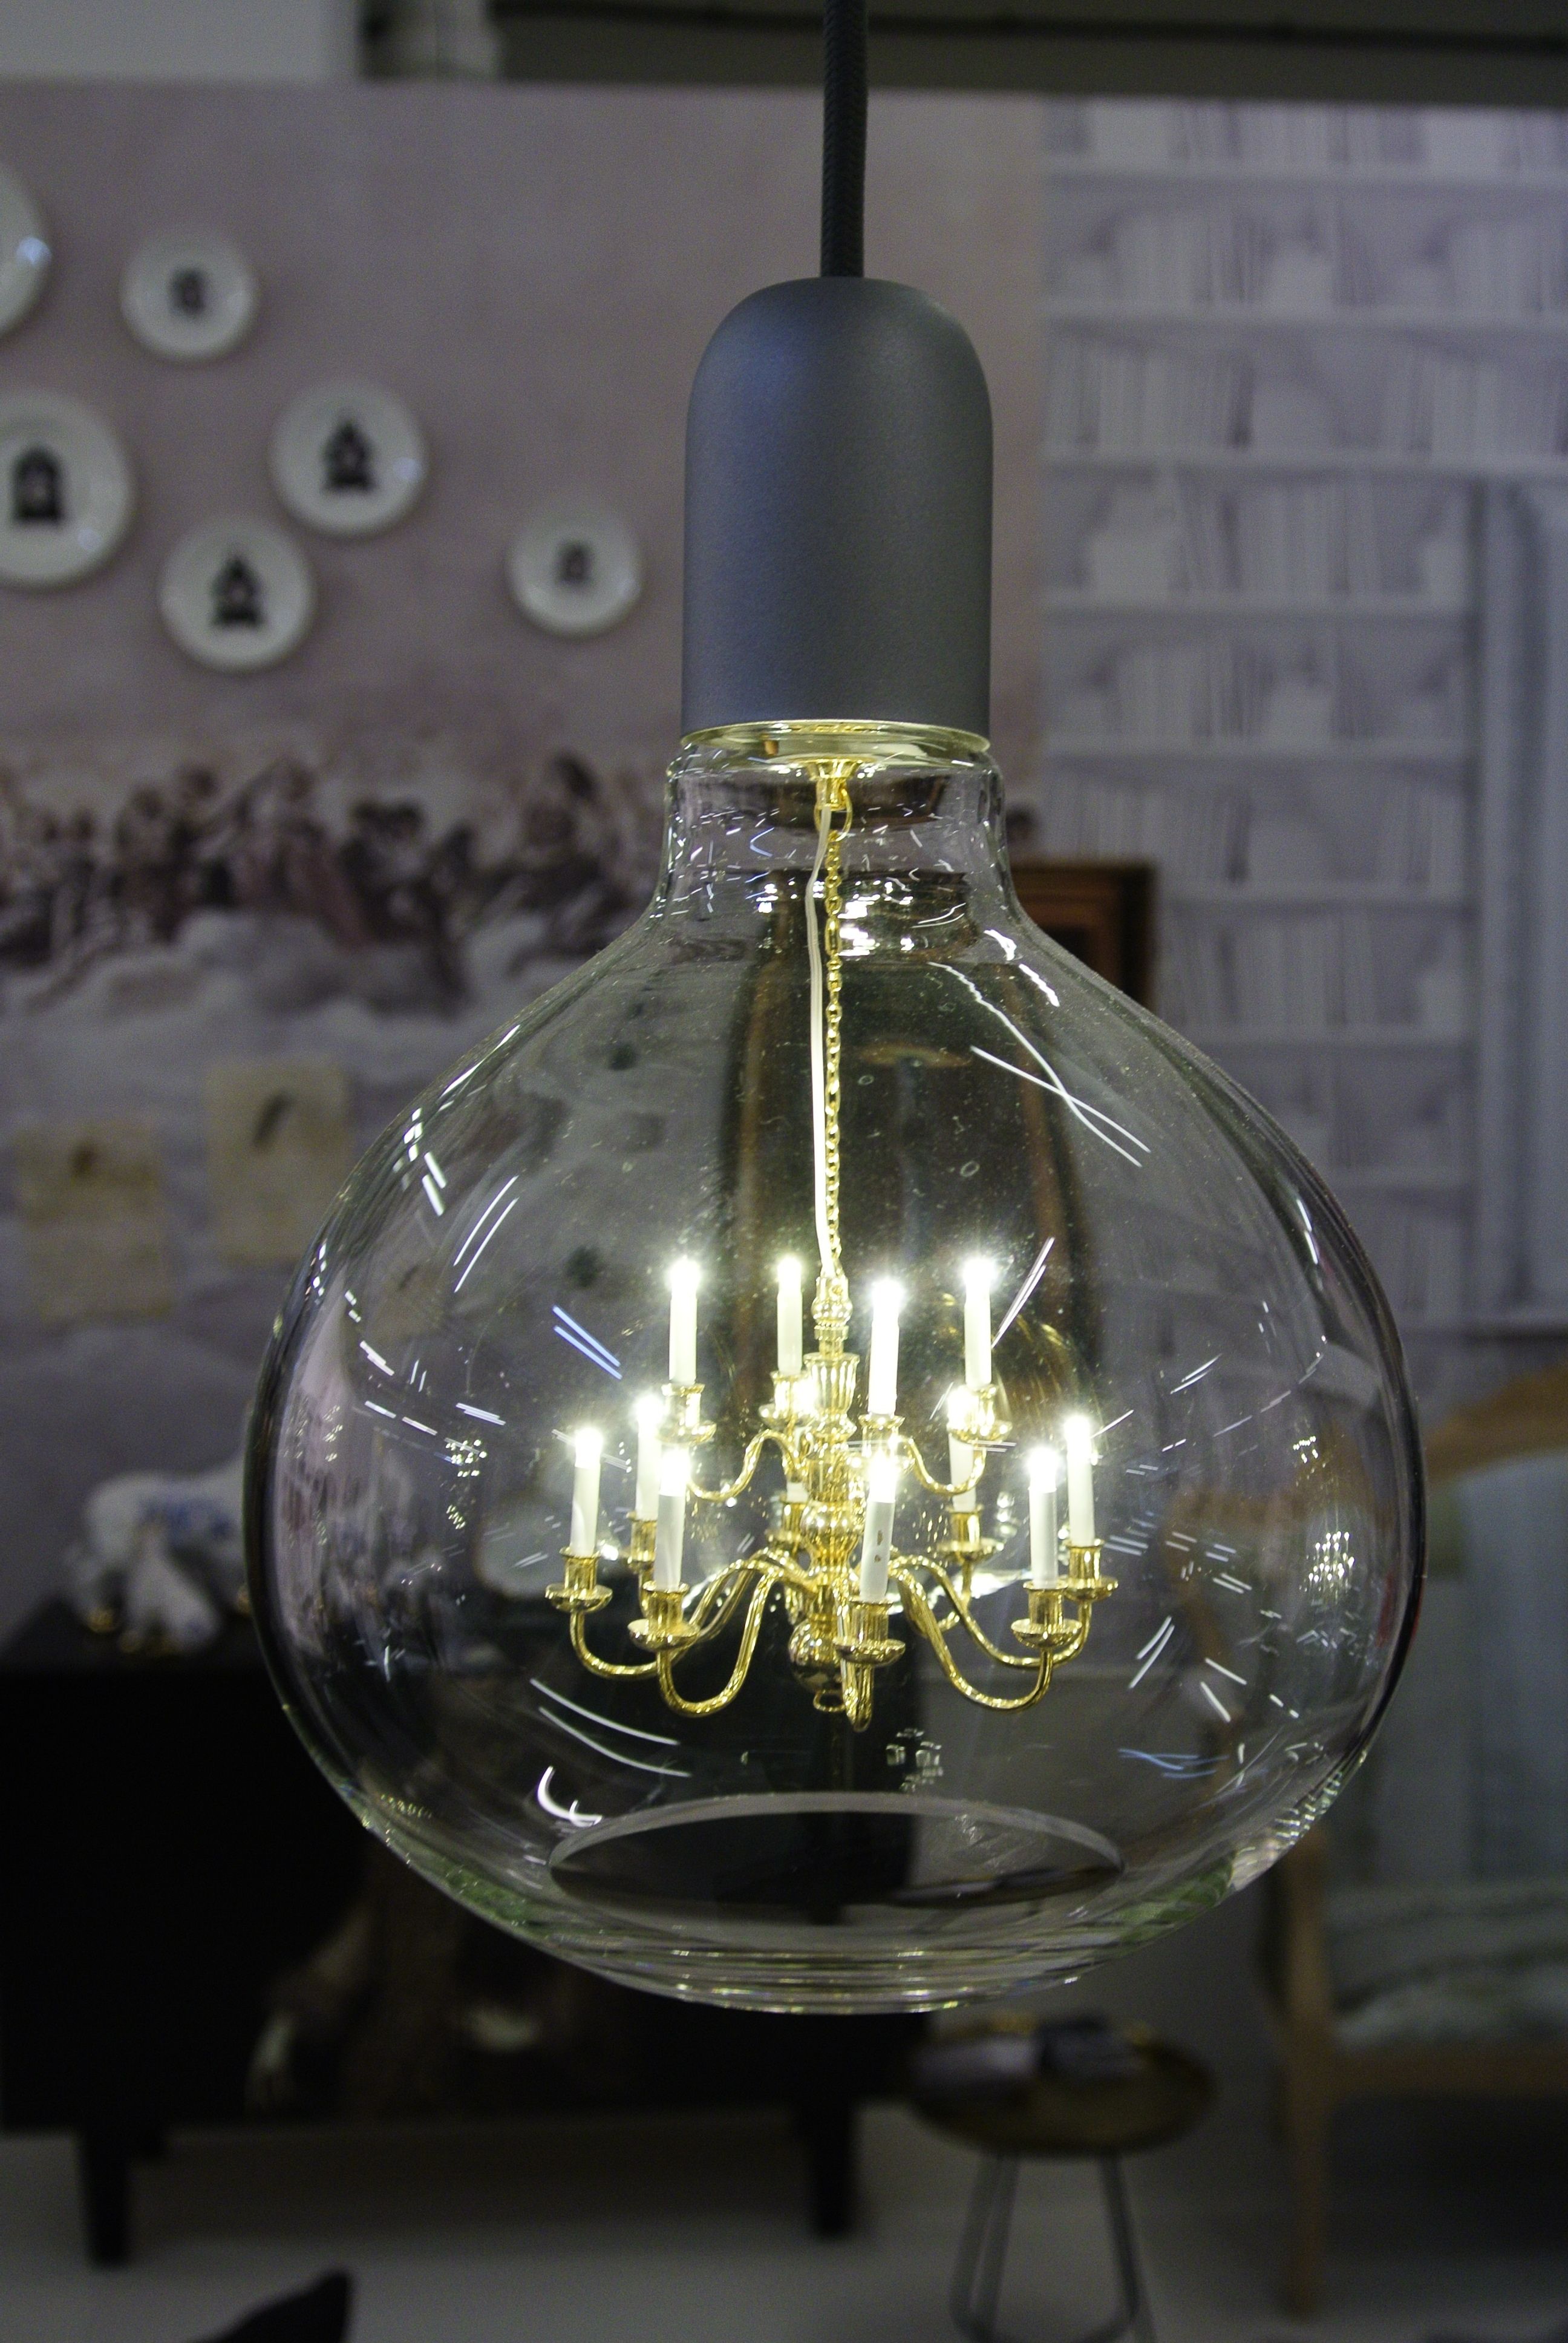 Chandelier Within A Bulb Mineheart Shown At Superbrandstent Pertaining To Weird Chandeliers (Photo 2 of 12)